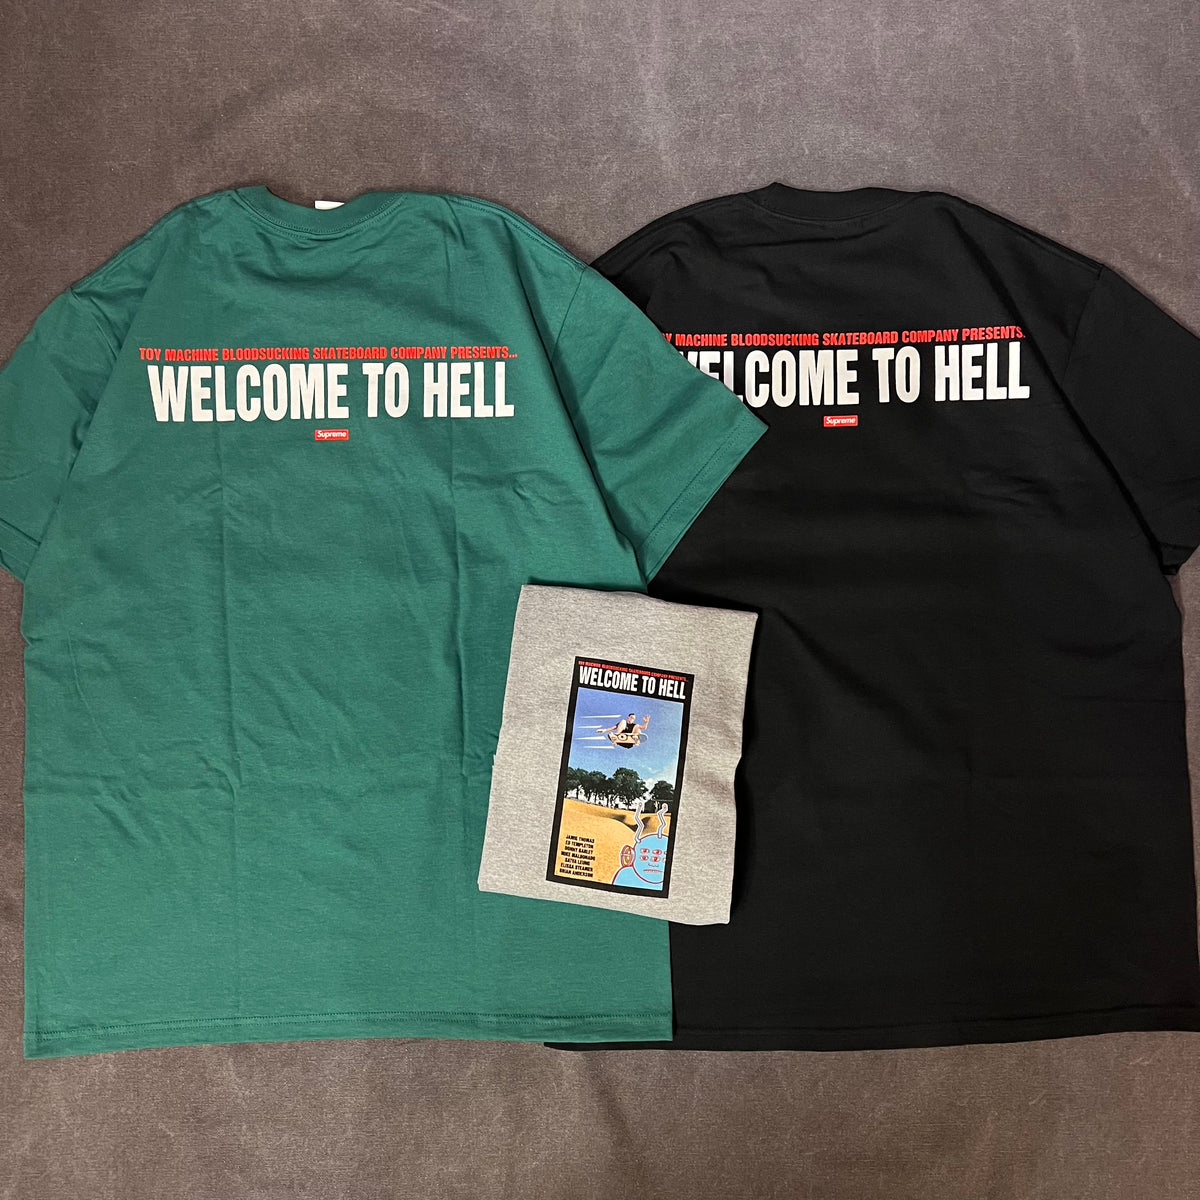 Supreme Toy Machine To Hell Tee - スケートボード